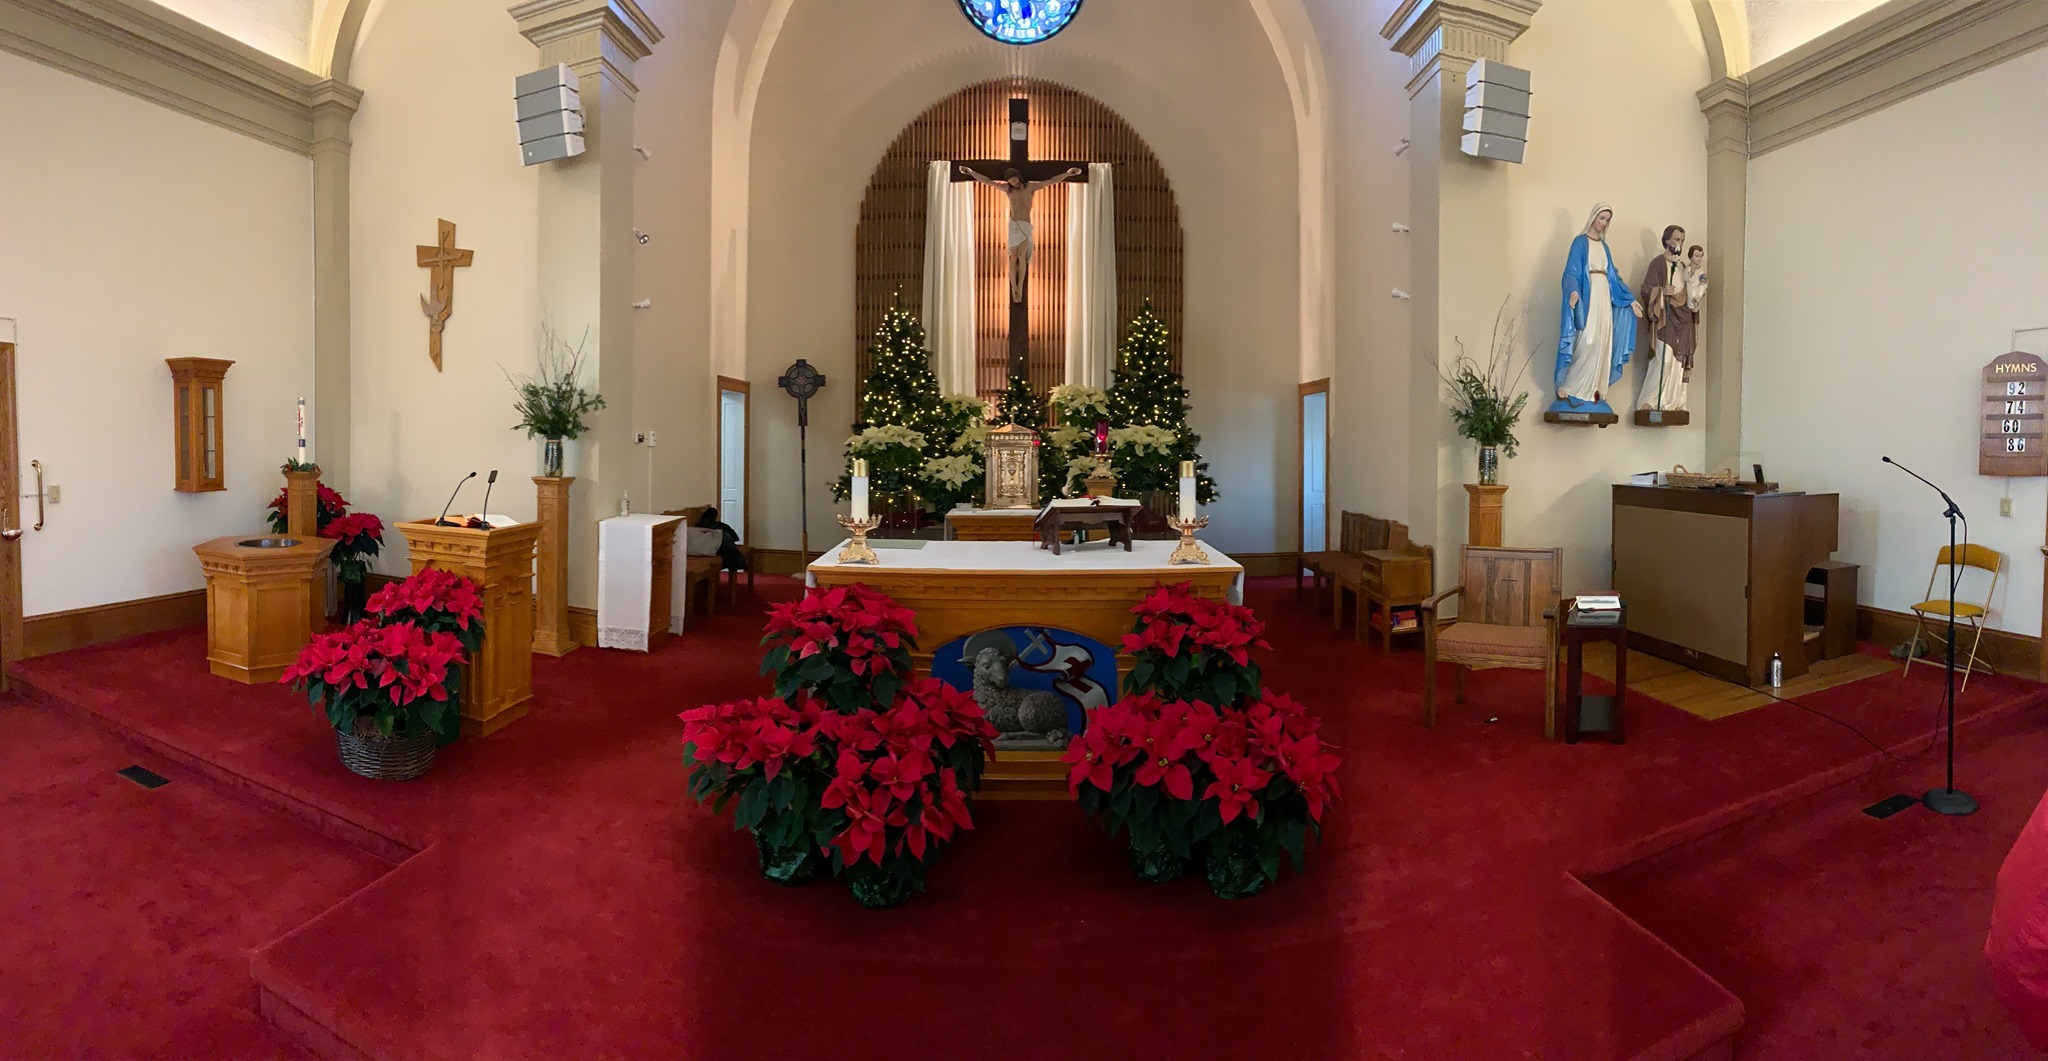 The Church of the Immaculate Conception in Westhampton Beach dressed for Christmas.